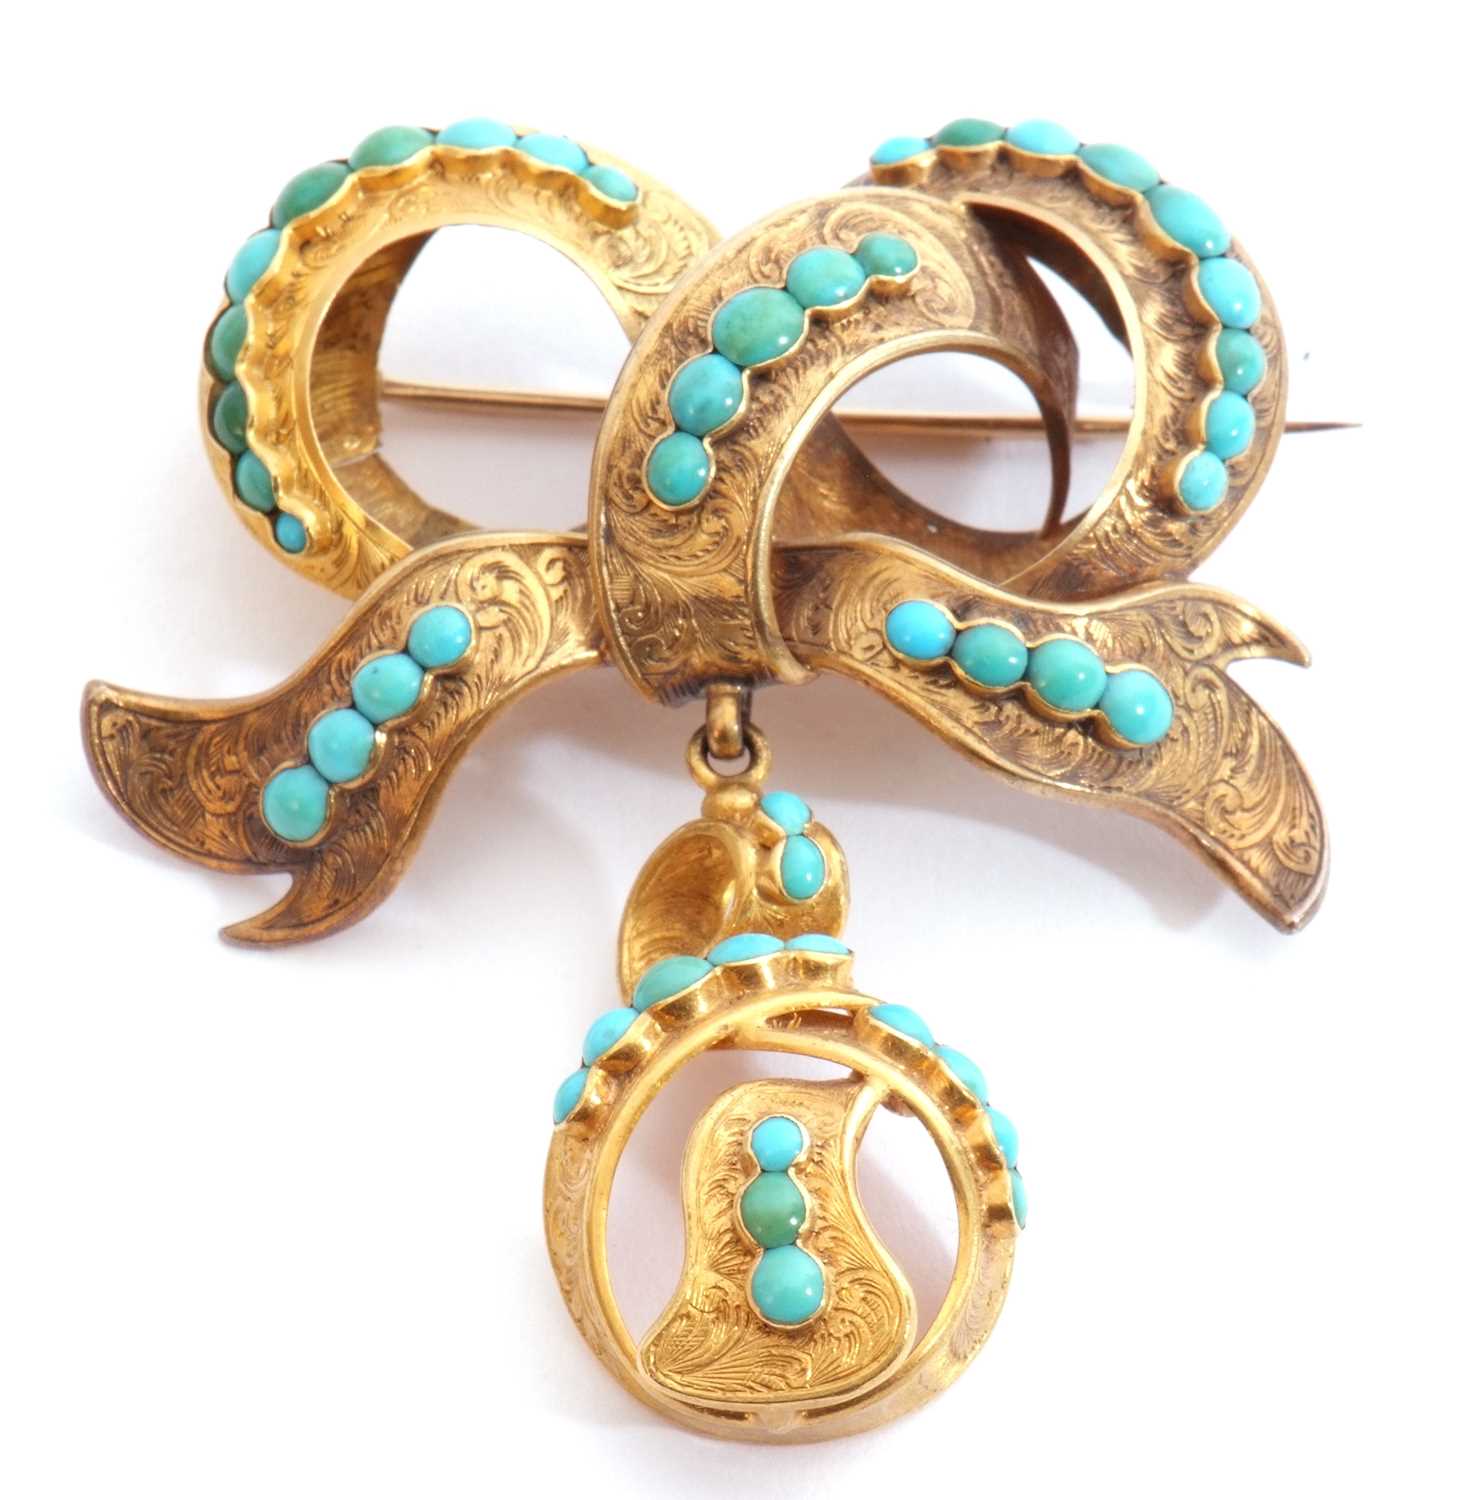 Antique gold and turquoise brooch, a tied ribbon design suspending a knotted ribbon, set - Image 2 of 3